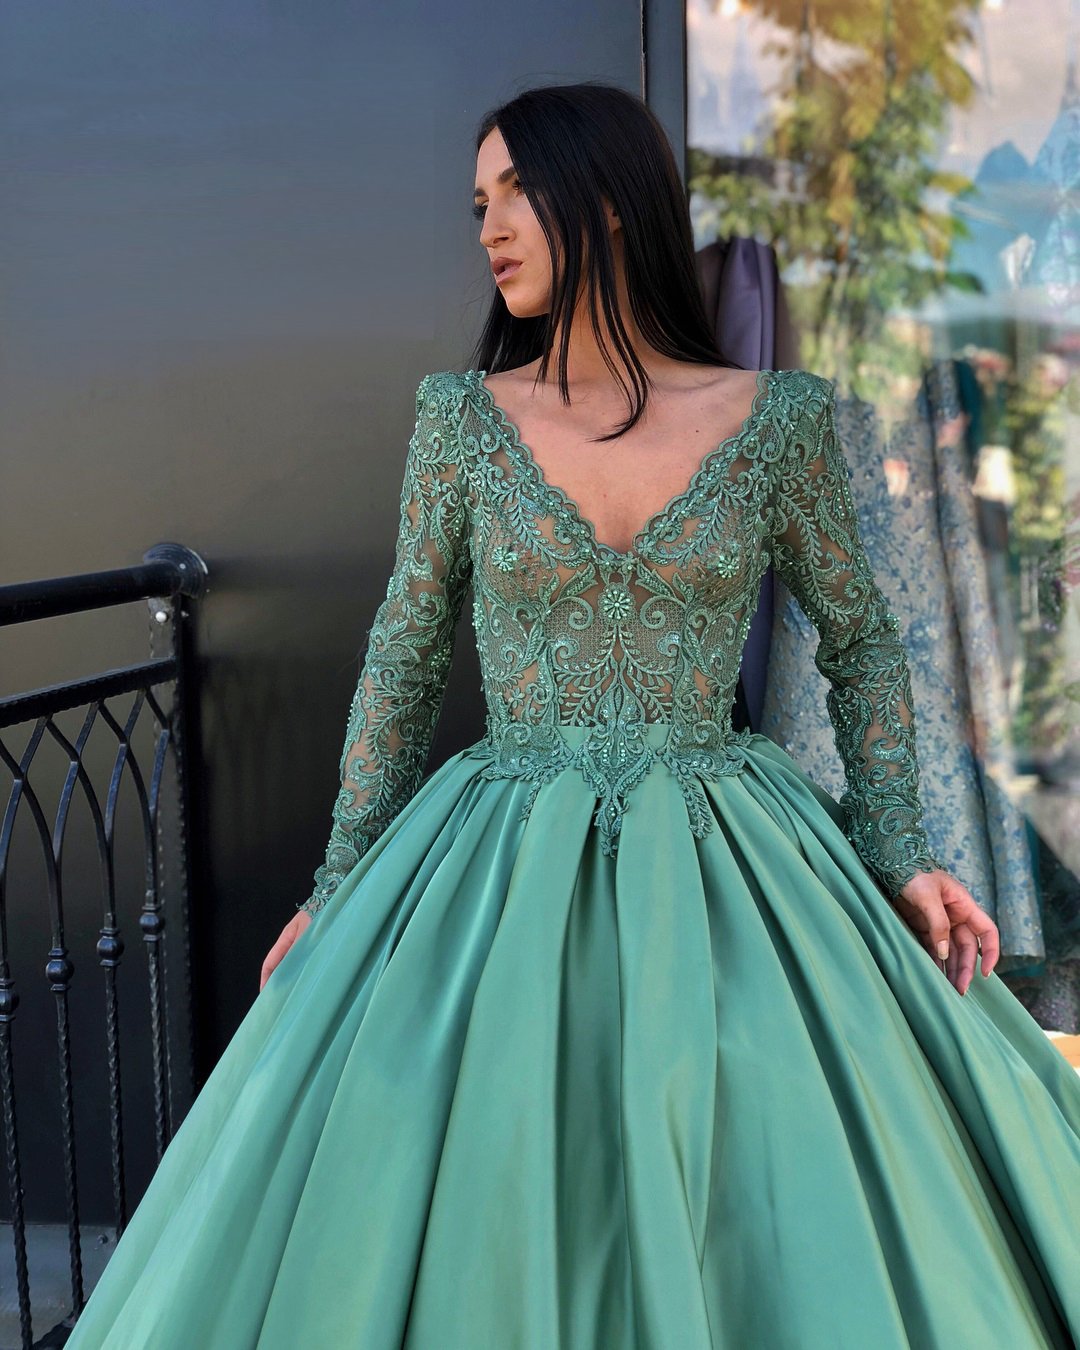 Olive Green Beaded Tulle Mermaid Prom Party Evening Dress Celebrity Pageant  Gown | eBay